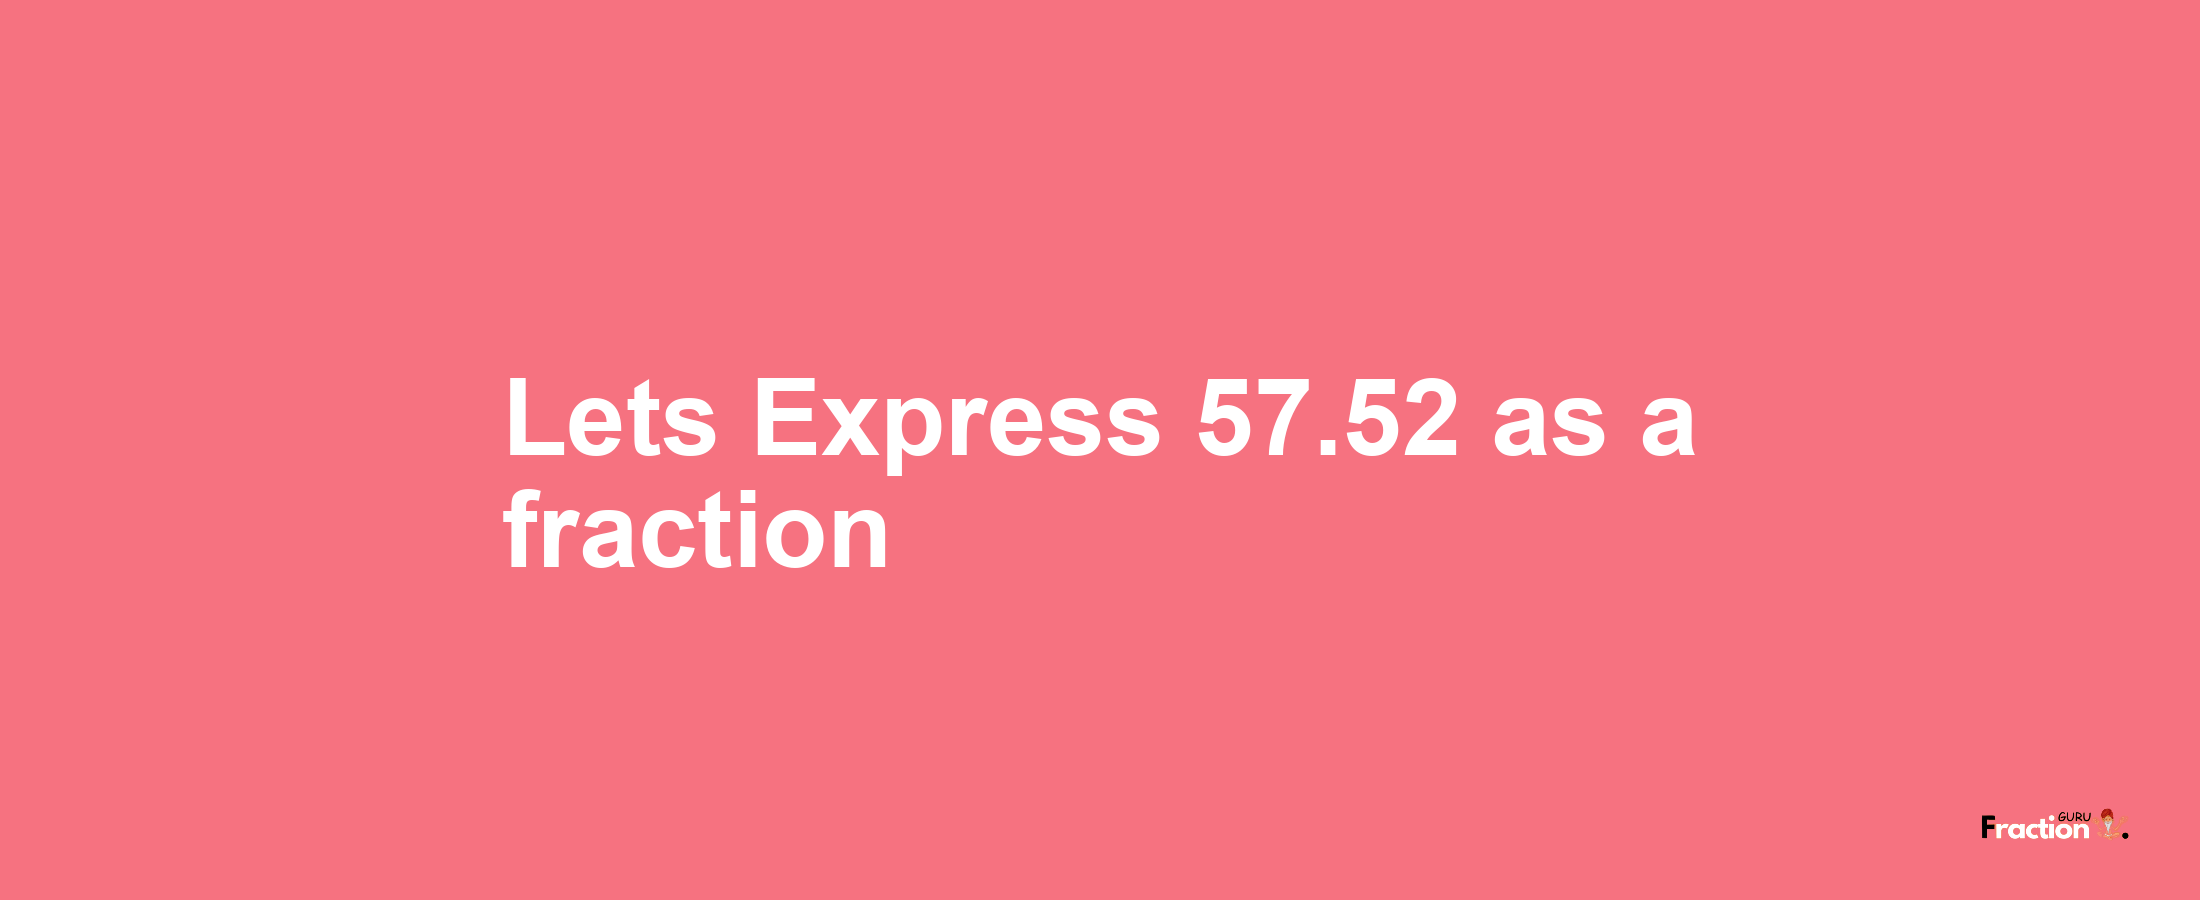 Lets Express 57.52 as afraction